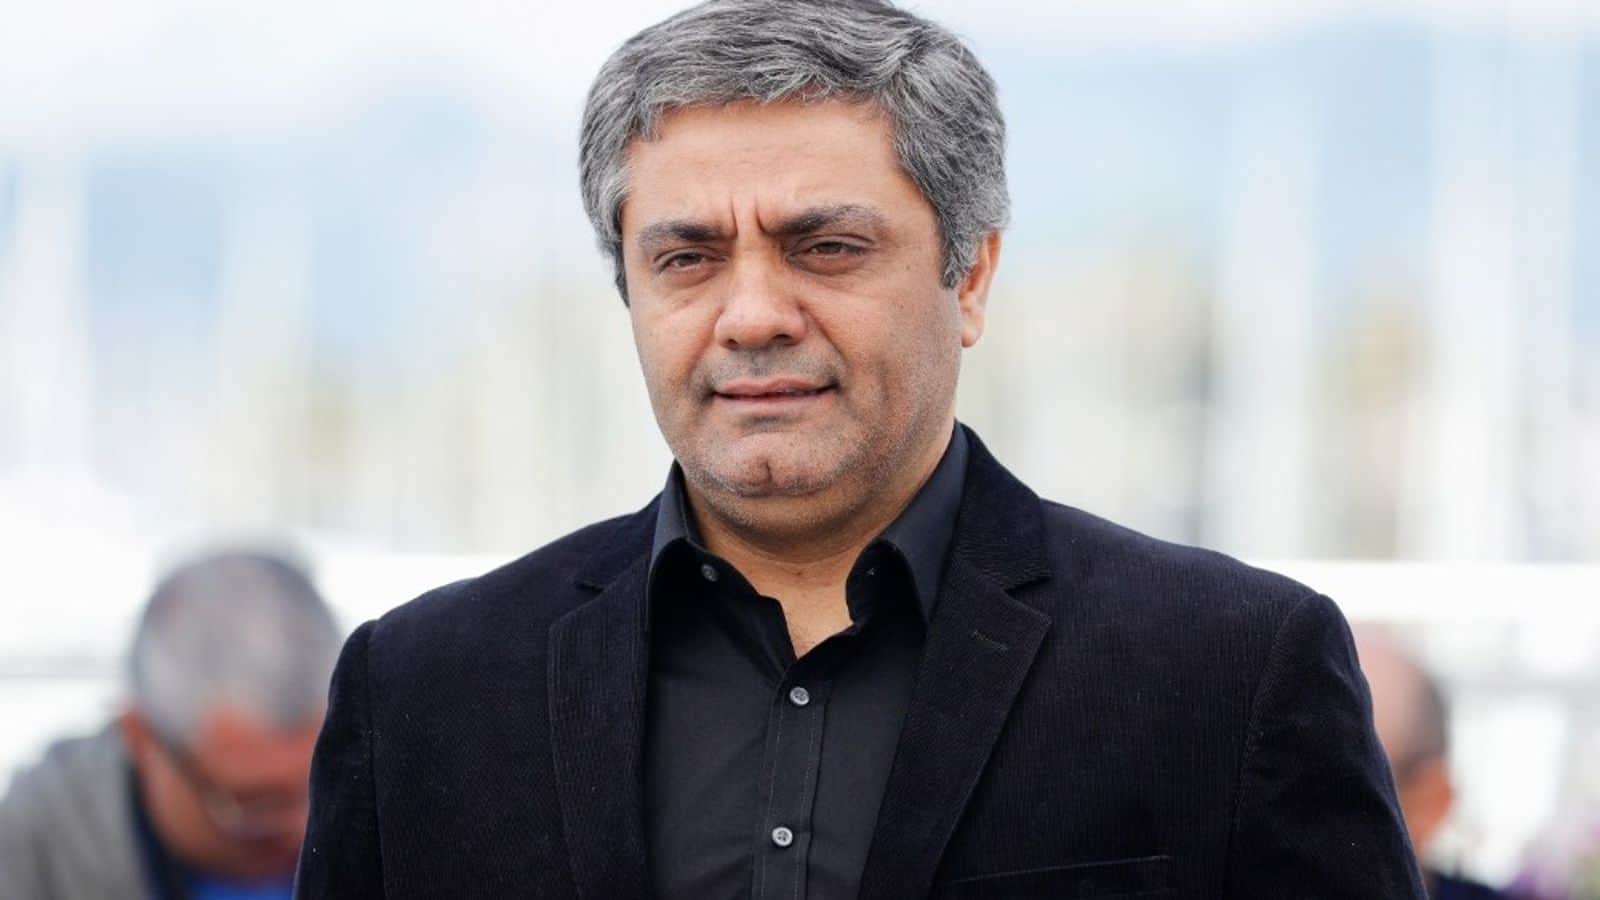 Iranian director who fled country recently to attend Cannes screening